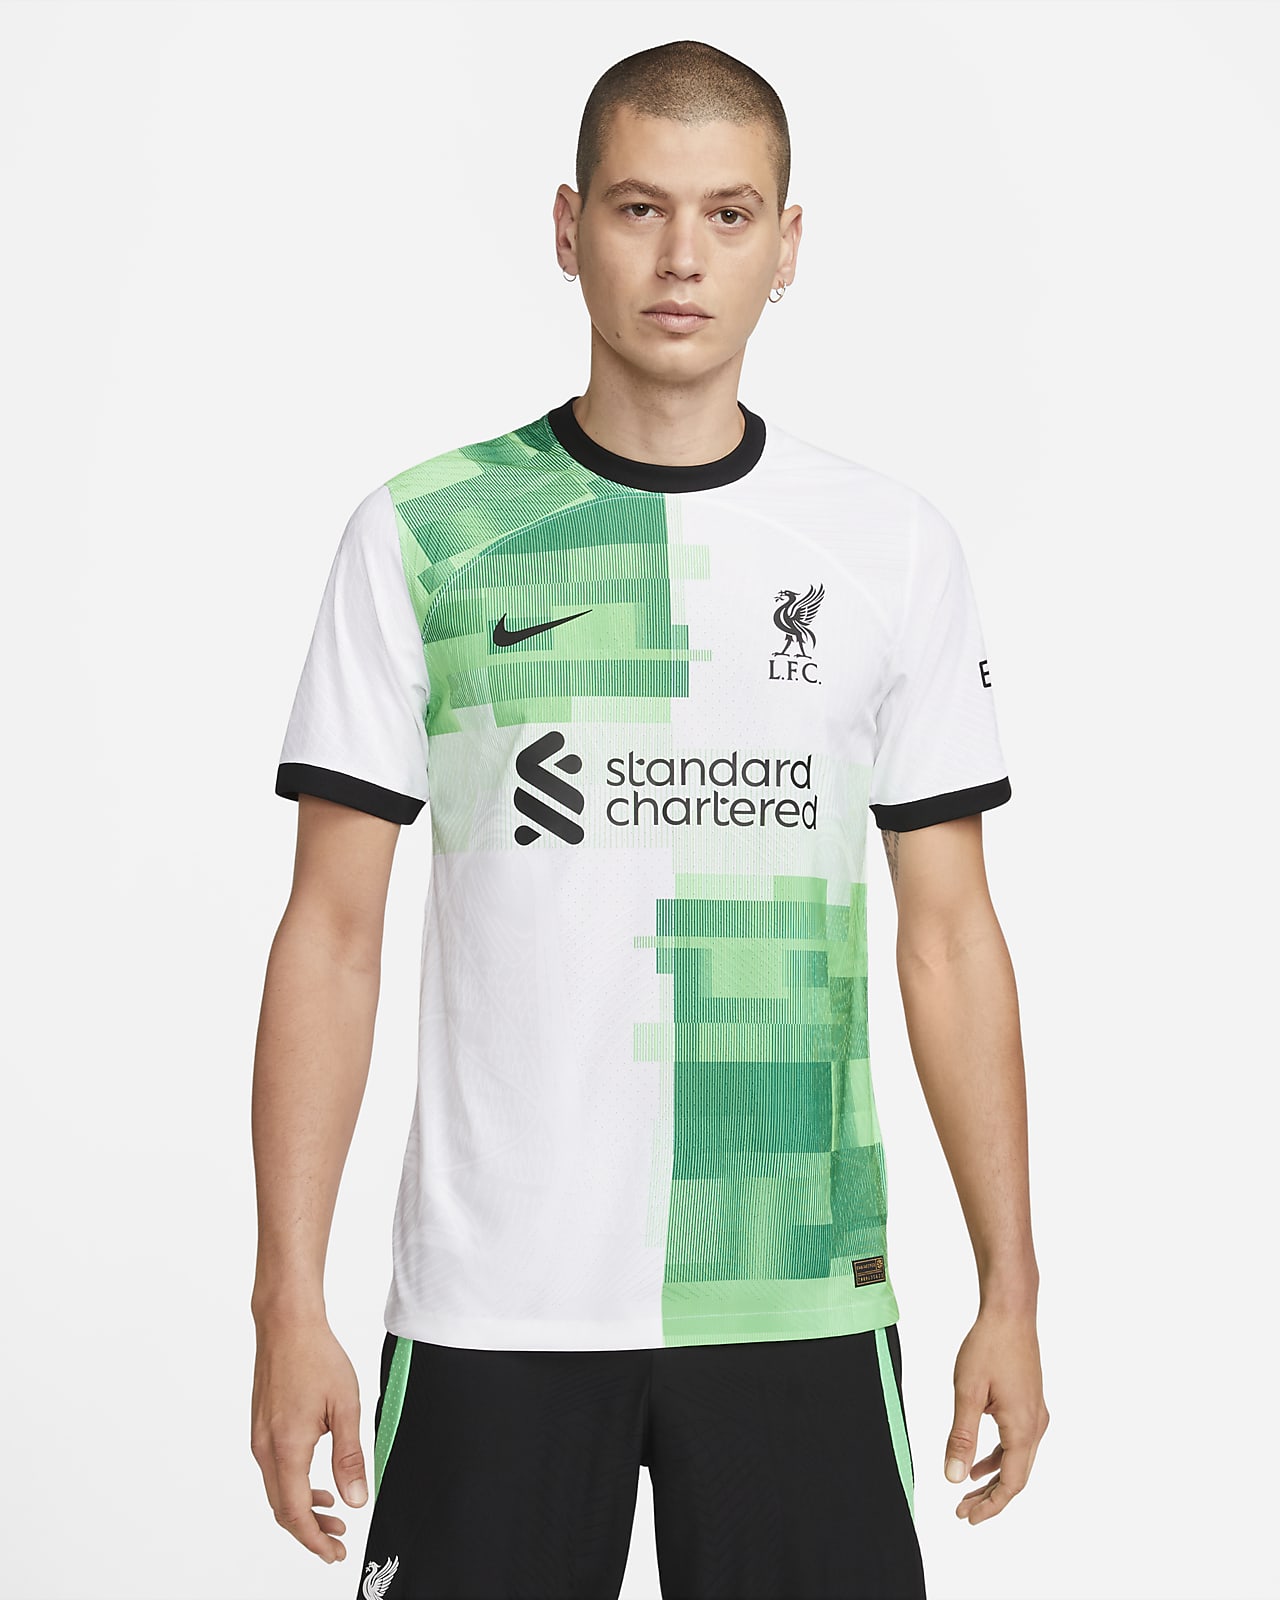 Introducing the NEW 2021/22 Nike Liverpool Home kit 